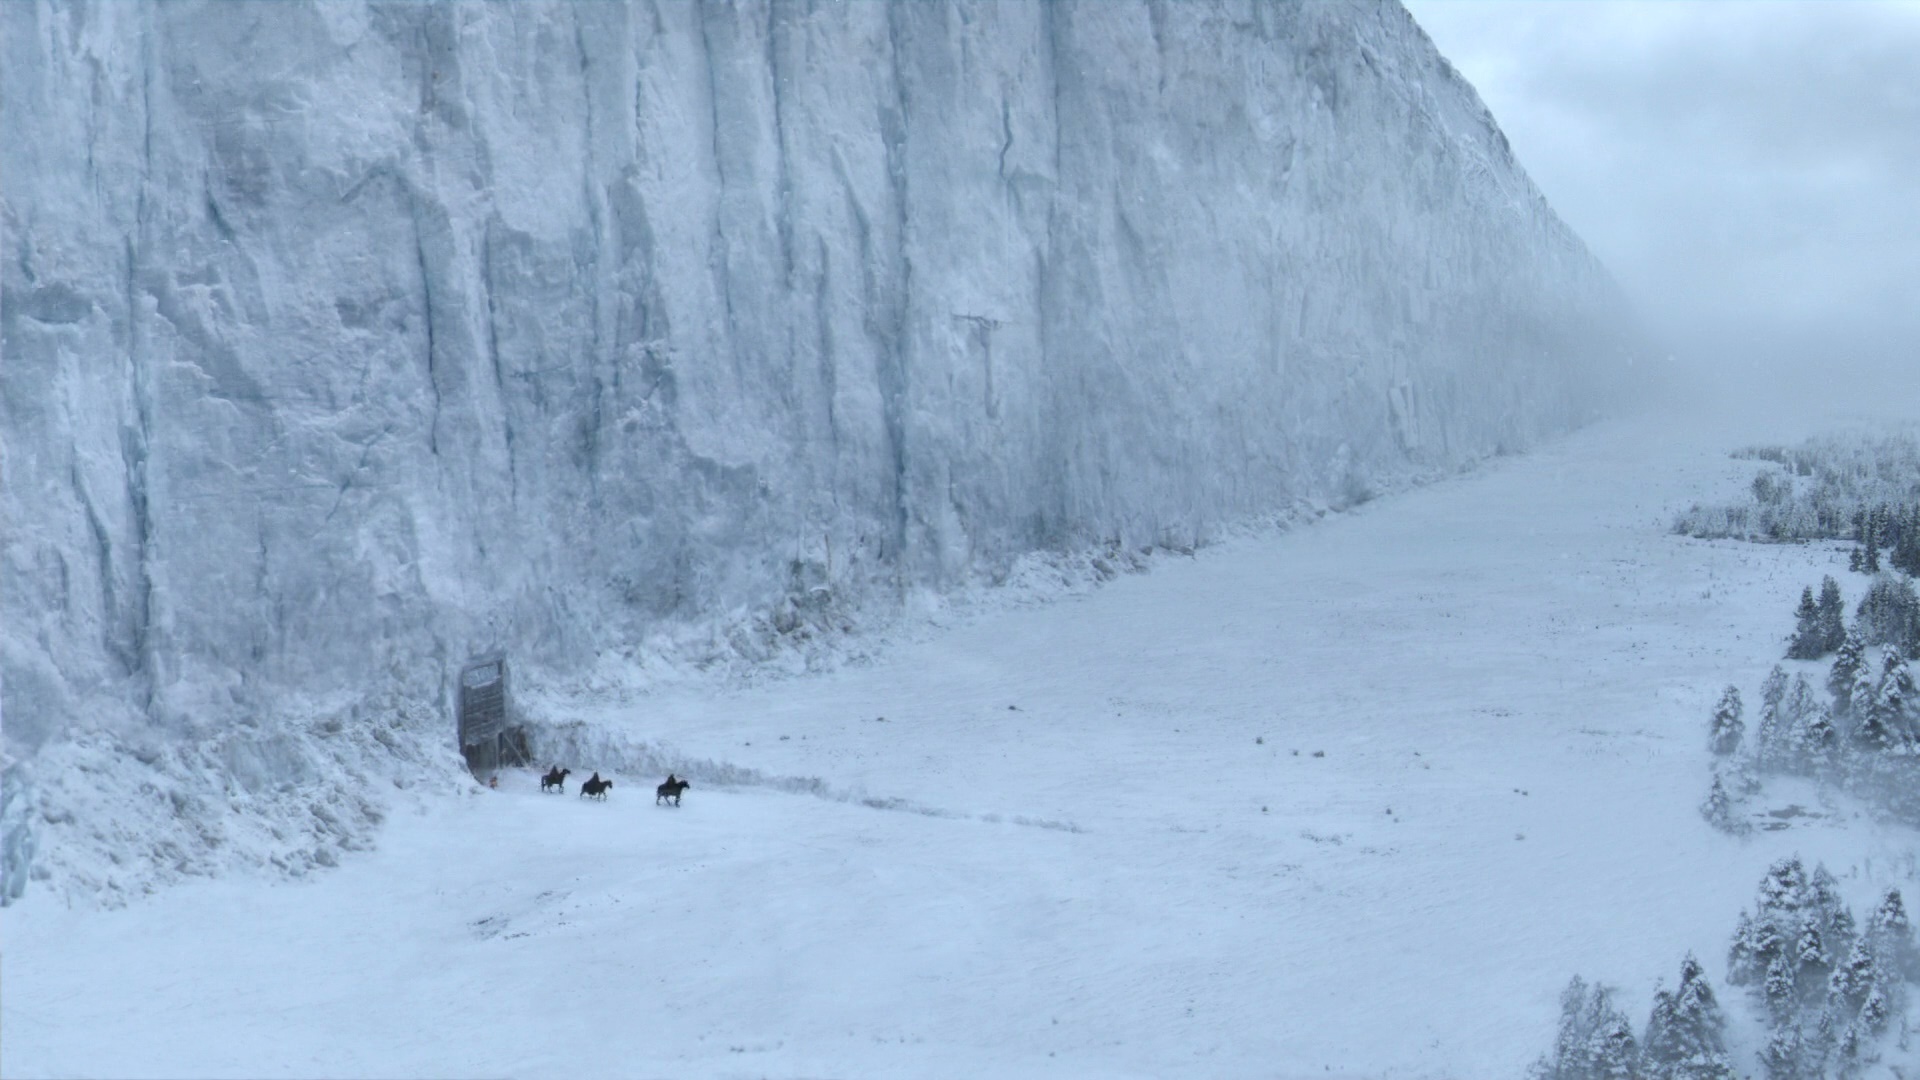 beyond the wall